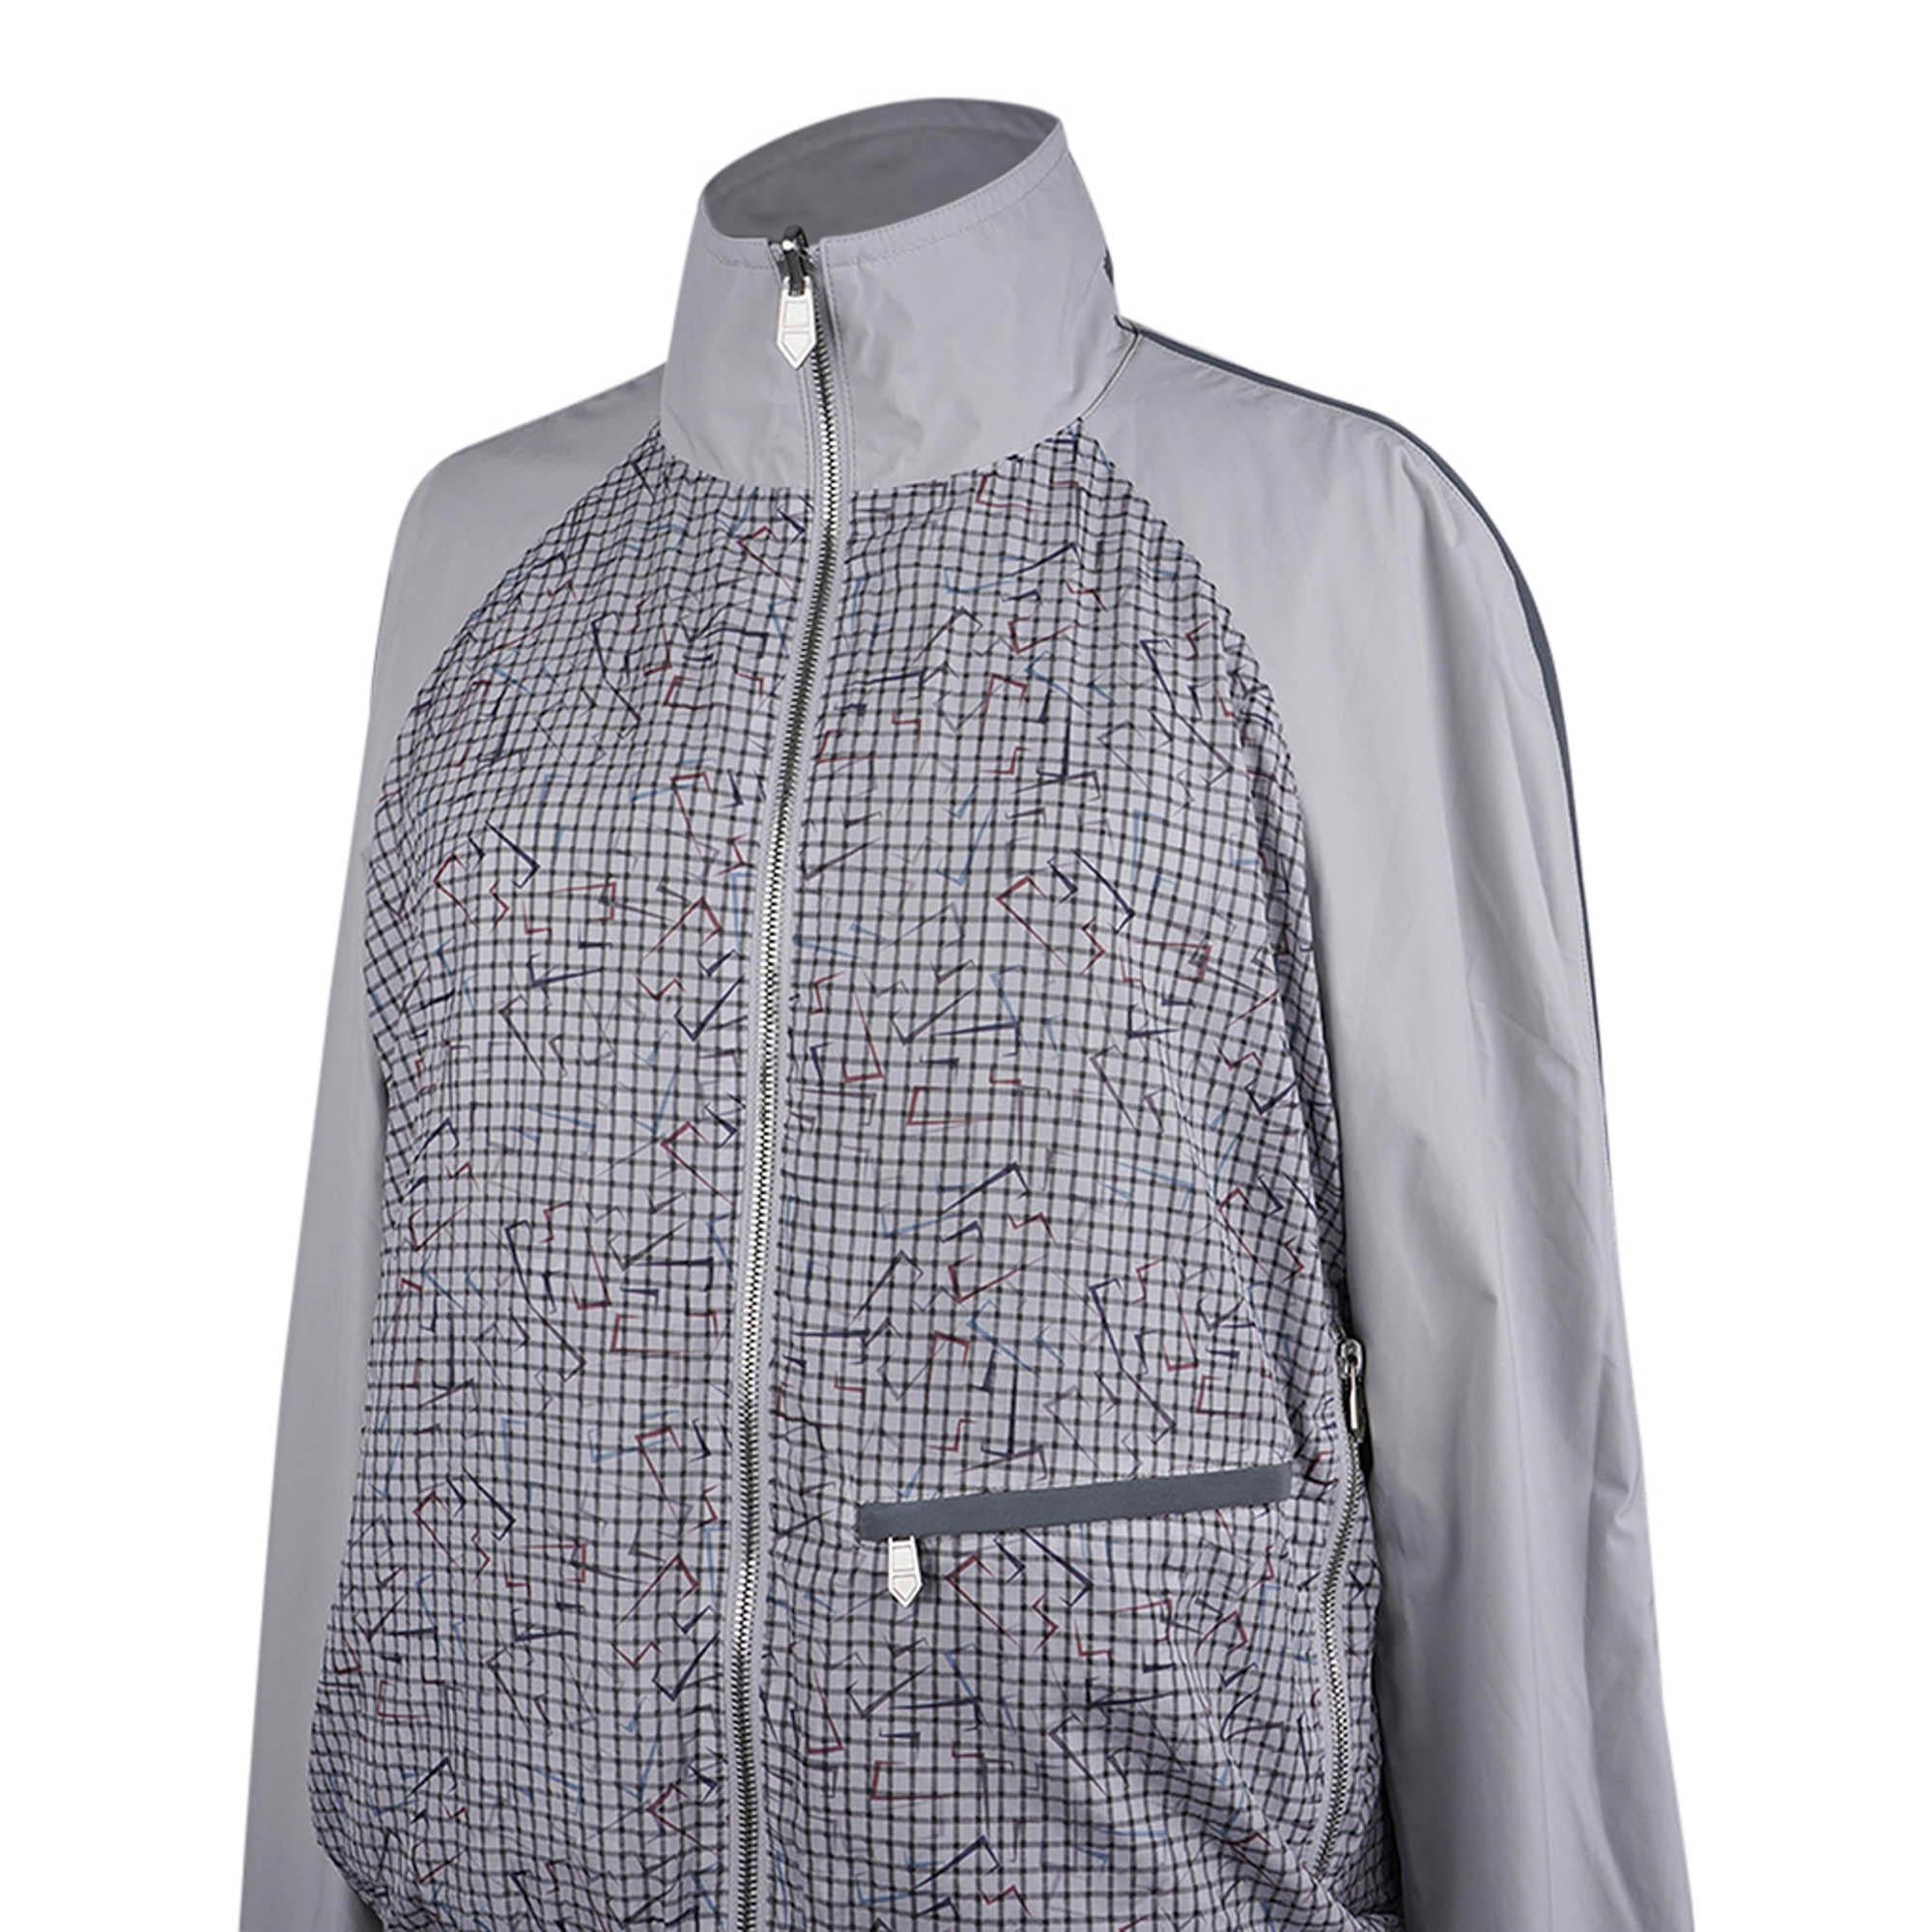 Mightychic offers an Hermes limited edition men's reversible men's windbreaker featured in Acier.
Water repellent with reflective gray accents.
The abstract logo print reverses to solid Acier.
H logo are detailed with blue and red on a grid